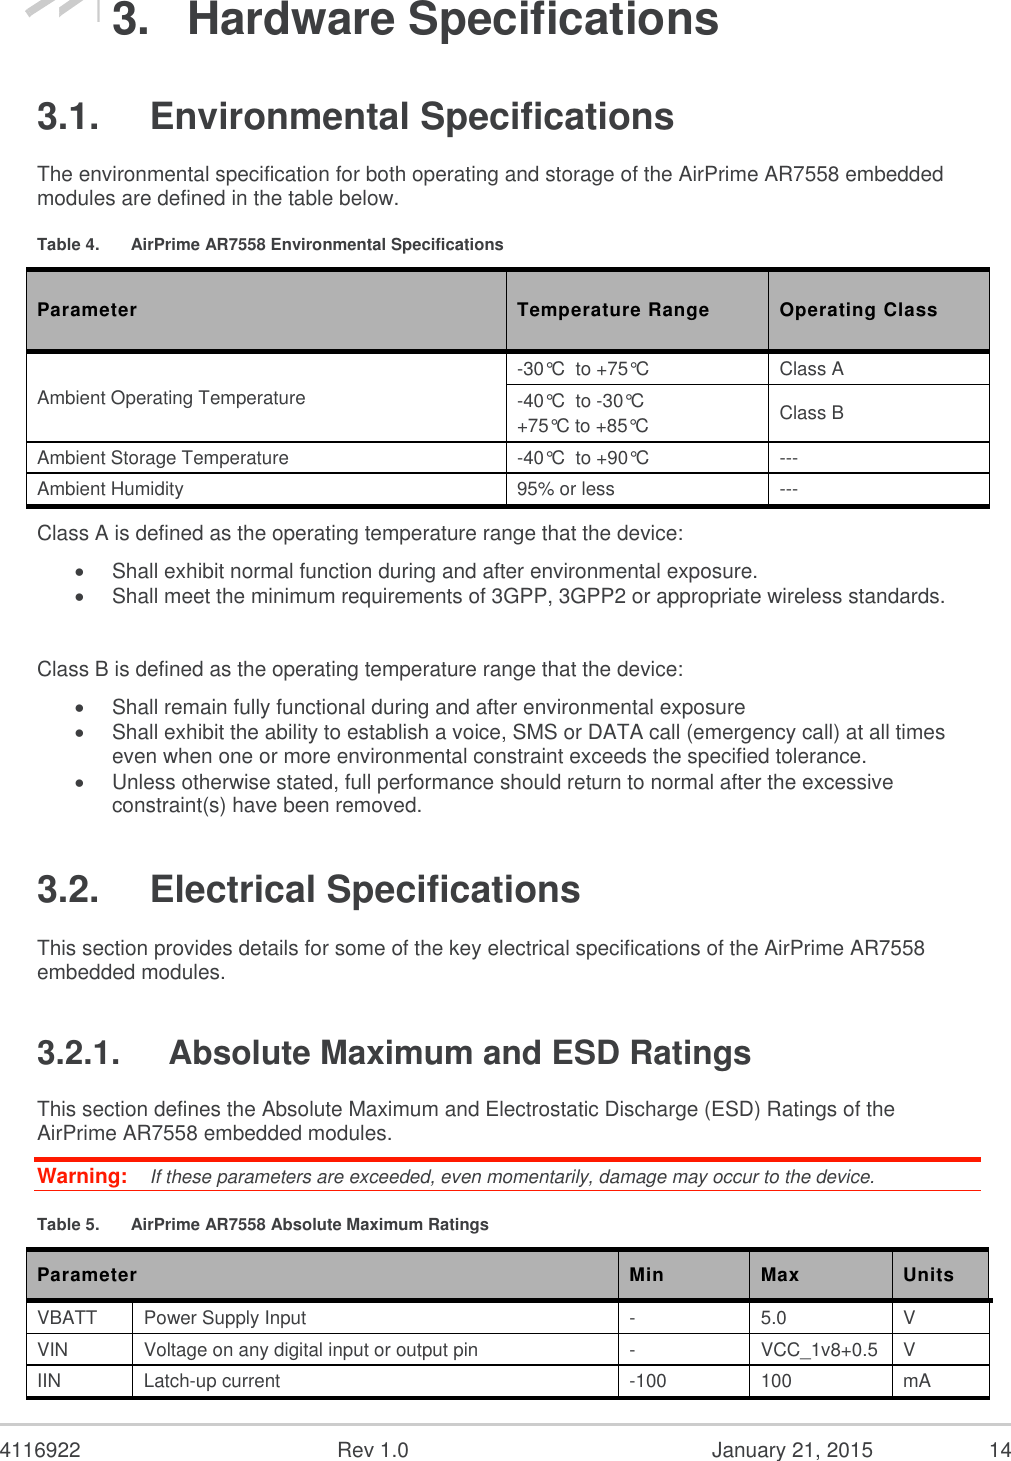  4116922  Rev 1.0  January 21, 2015  14 3.  Hardware Specifications 3.1.  Environmental Specifications The environmental specification for both operating and storage of the AirPrime AR7558 embedded modules are defined in the table below. Table 4.  AirPrime AR7558 Environmental Specifications Parameter Temperature Range Operating Class Ambient Operating Temperature -30°C  to +75°C Class A -40°C  to -30°C +75°C to +85°C Class B Ambient Storage Temperature -40°C  to +90°C --- Ambient Humidity 95% or less --- Class A is defined as the operating temperature range that the device:  Shall exhibit normal function during and after environmental exposure.  Shall meet the minimum requirements of 3GPP, 3GPP2 or appropriate wireless standards.  Class B is defined as the operating temperature range that the device:   Shall remain fully functional during and after environmental exposure  Shall exhibit the ability to establish a voice, SMS or DATA call (emergency call) at all times even when one or more environmental constraint exceeds the specified tolerance.  Unless otherwise stated, full performance should return to normal after the excessive constraint(s) have been removed. 3.2.  Electrical Specifications This section provides details for some of the key electrical specifications of the AirPrime AR7558 embedded modules. 3.2.1.  Absolute Maximum and ESD Ratings This section defines the Absolute Maximum and Electrostatic Discharge (ESD) Ratings of the AirPrime AR7558 embedded modules. Warning:   If these parameters are exceeded, even momentarily, damage may occur to the device. Table 5.  AirPrime AR7558 Absolute Maximum Ratings Parameter Min Max Units VBATT Power Supply Input - 5.0 V VIN Voltage on any digital input or output pin - VCC_1v8+0.5 V IIN Latch-up current -100 100 mA 